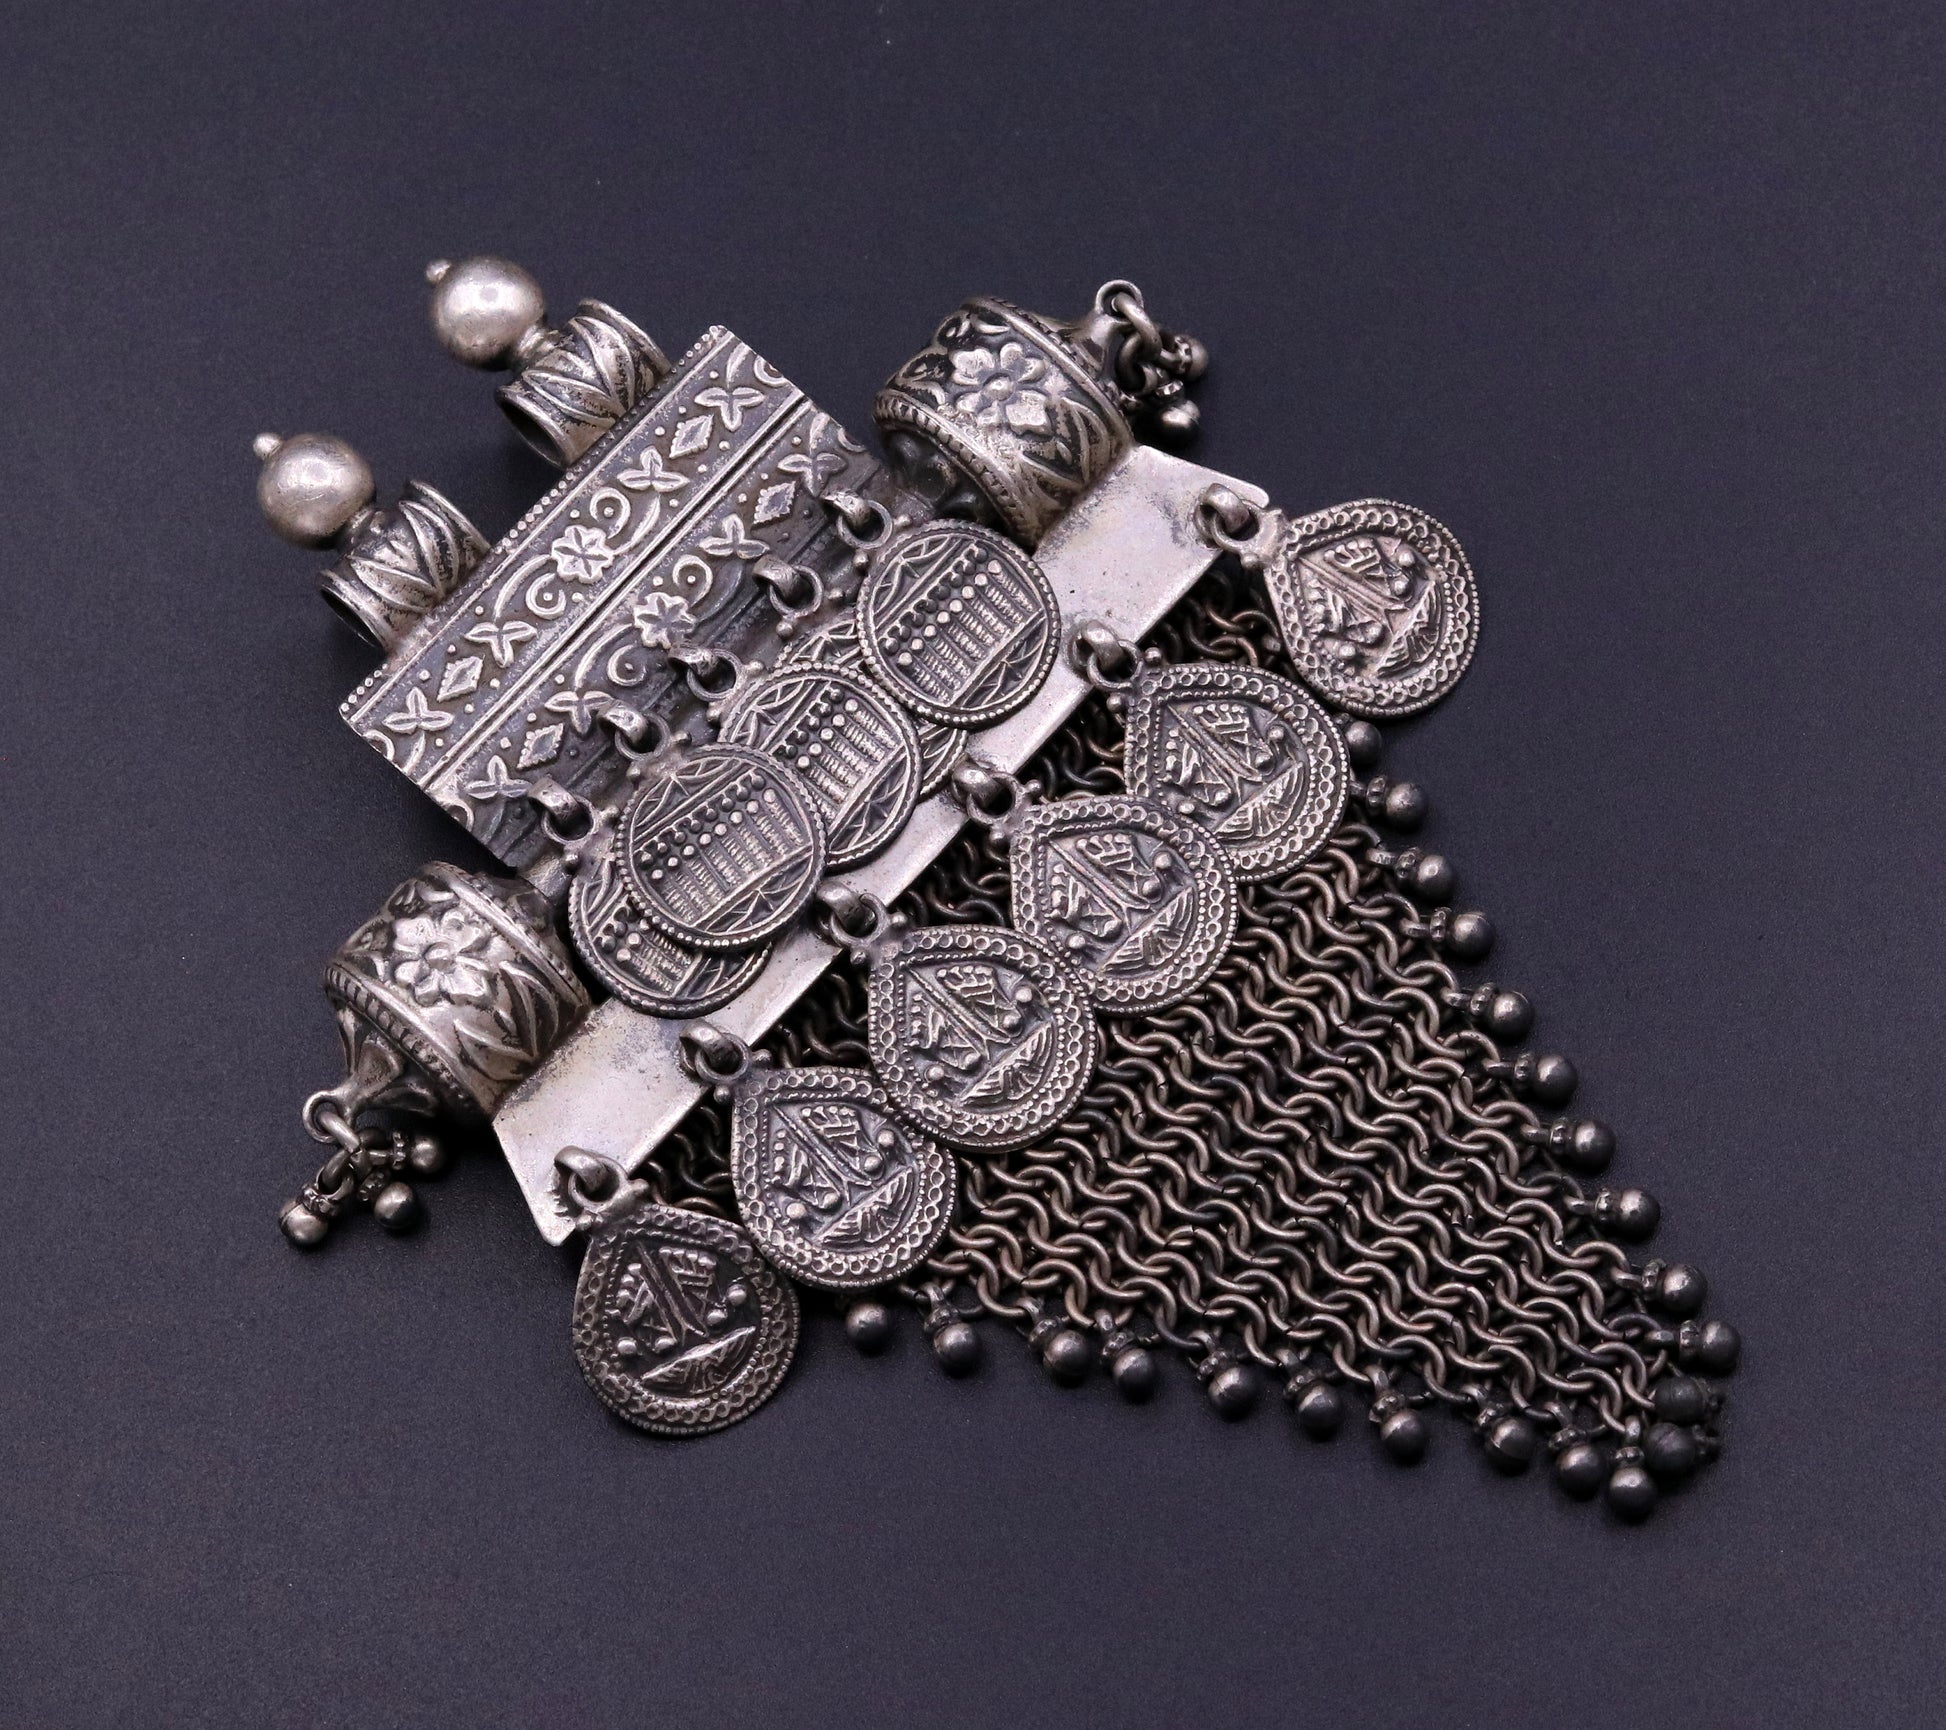 Vintage Traditional trendy design 925 sterling silver handmade long pendant necklace tribal ethnic Banjara Boho jewelry from india nsp330 - TRIBAL ORNAMENTS